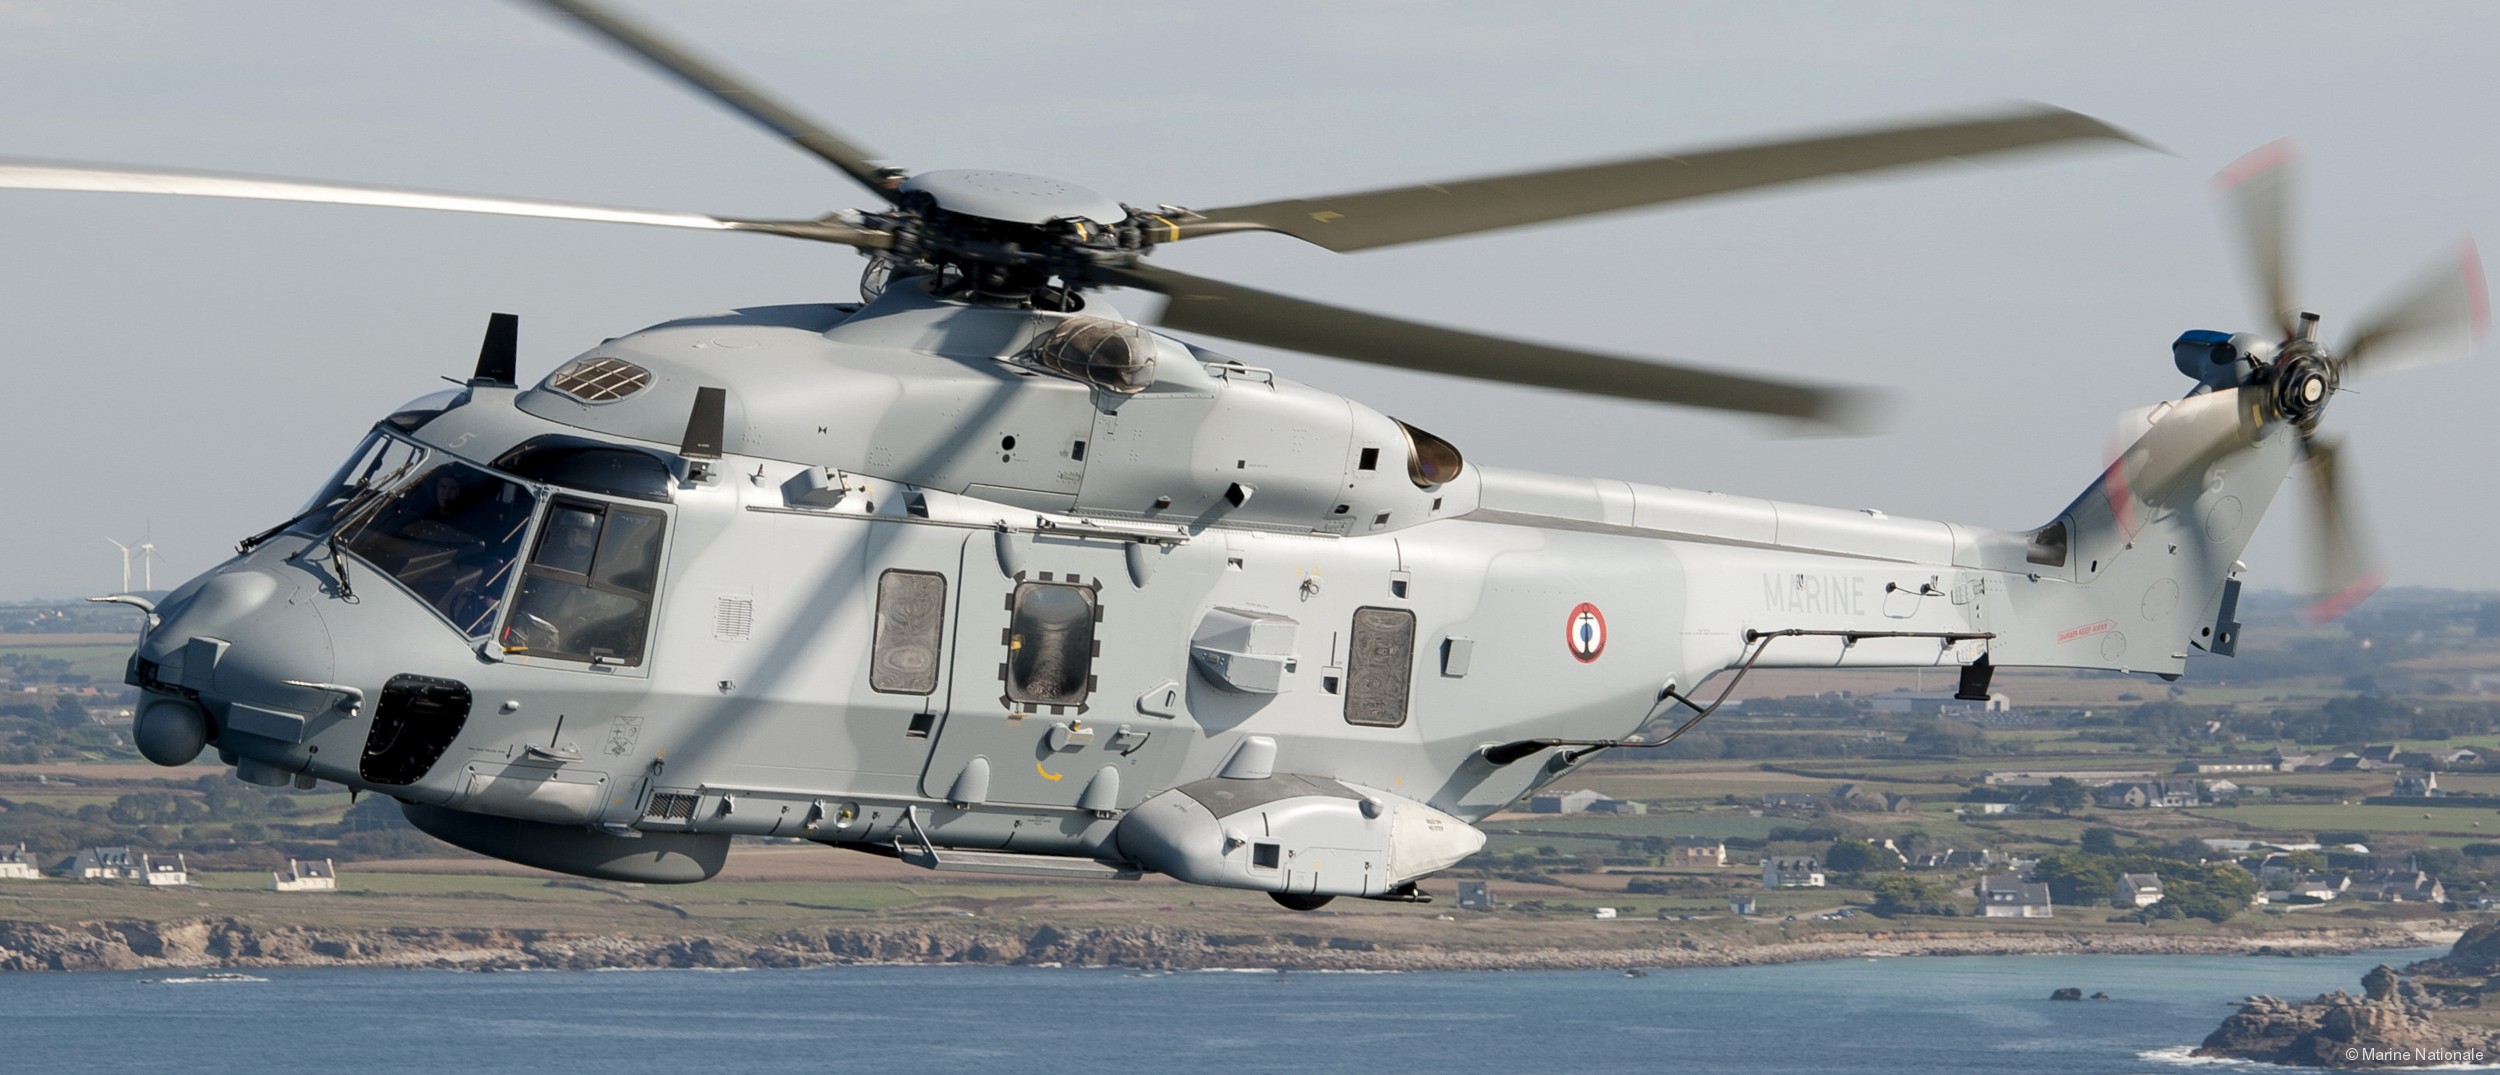 nh90 caiman helicopter french navy nfh marine nationale nhindustries 31 33 flottille